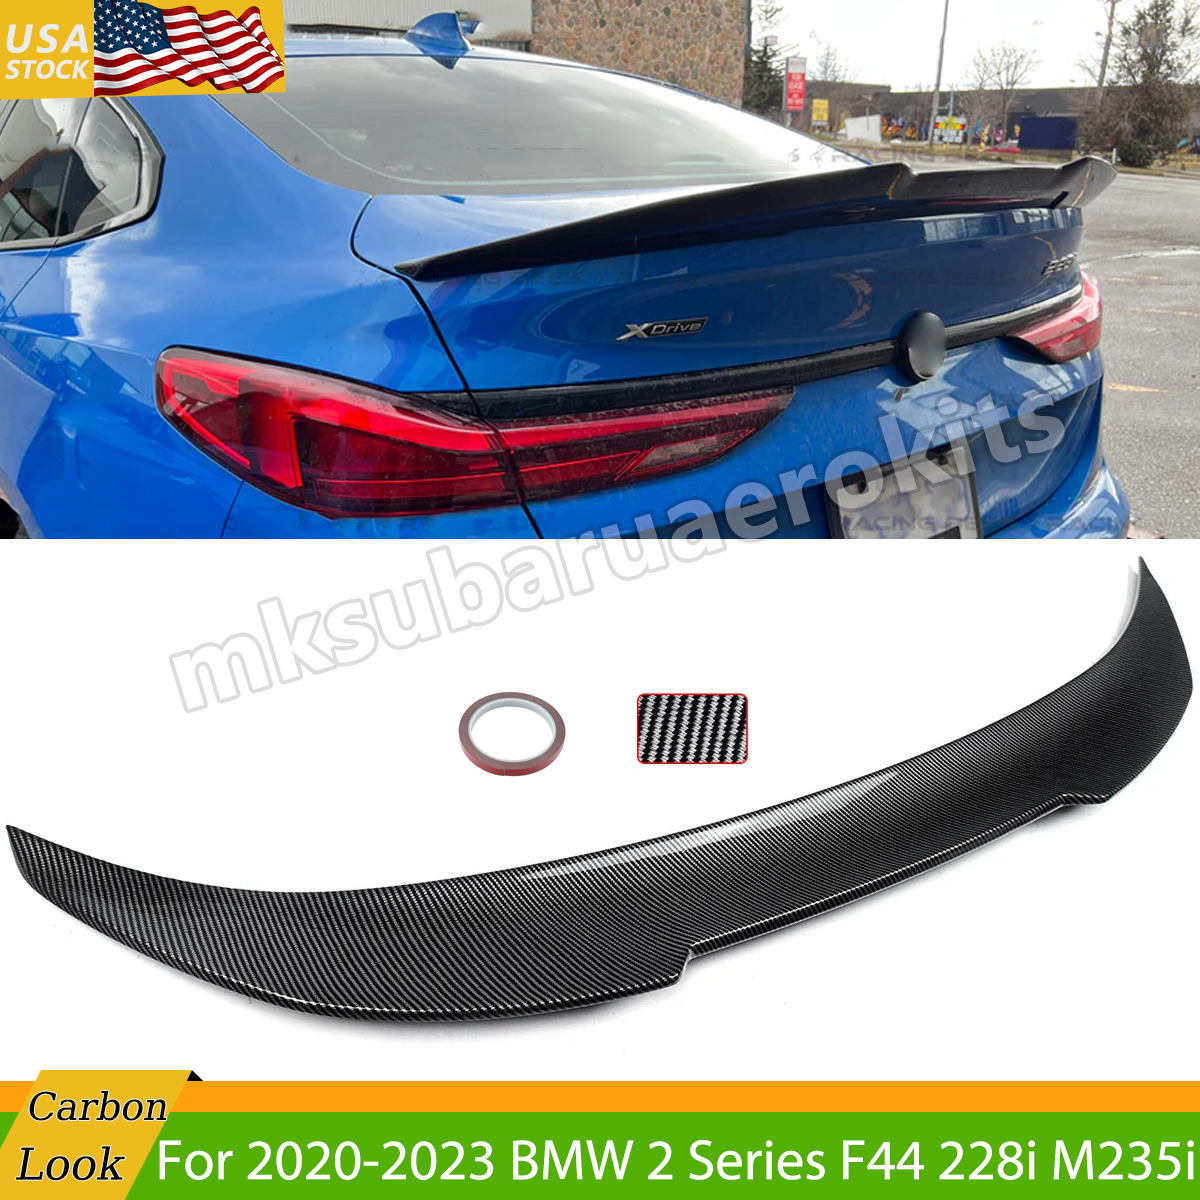 PSM Rear Spoiler Lip Wing Carbon Look For 2020-2023 BMW 2 Series F44 228i M235i